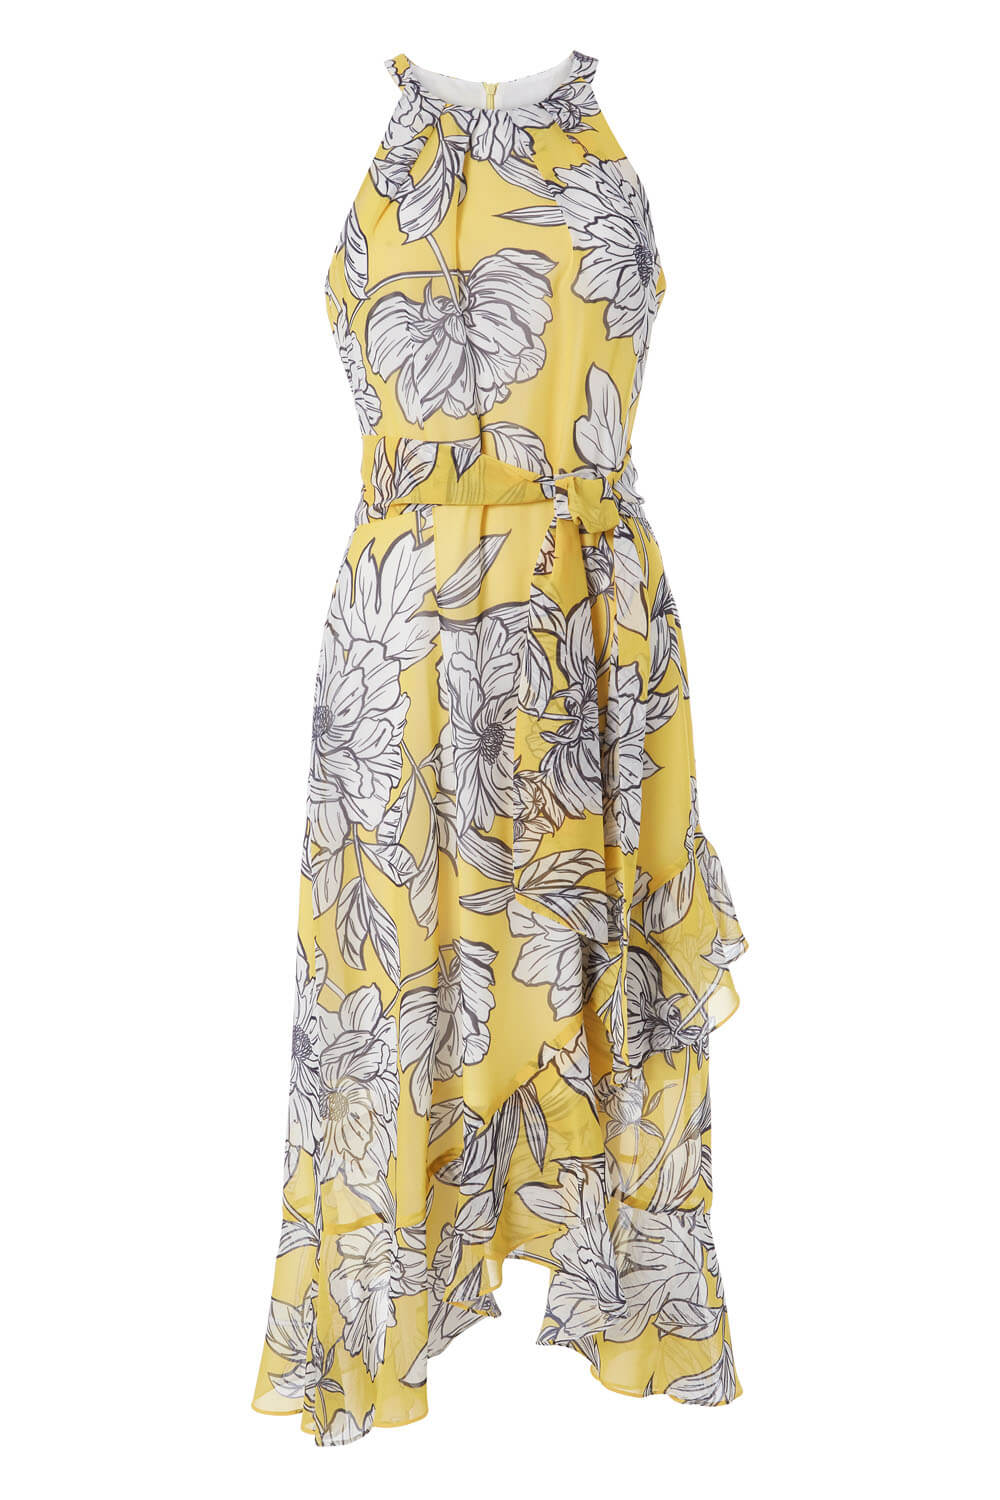 Yellow Floral Asymmetric Belted Midi Dress, Image 5 of 5